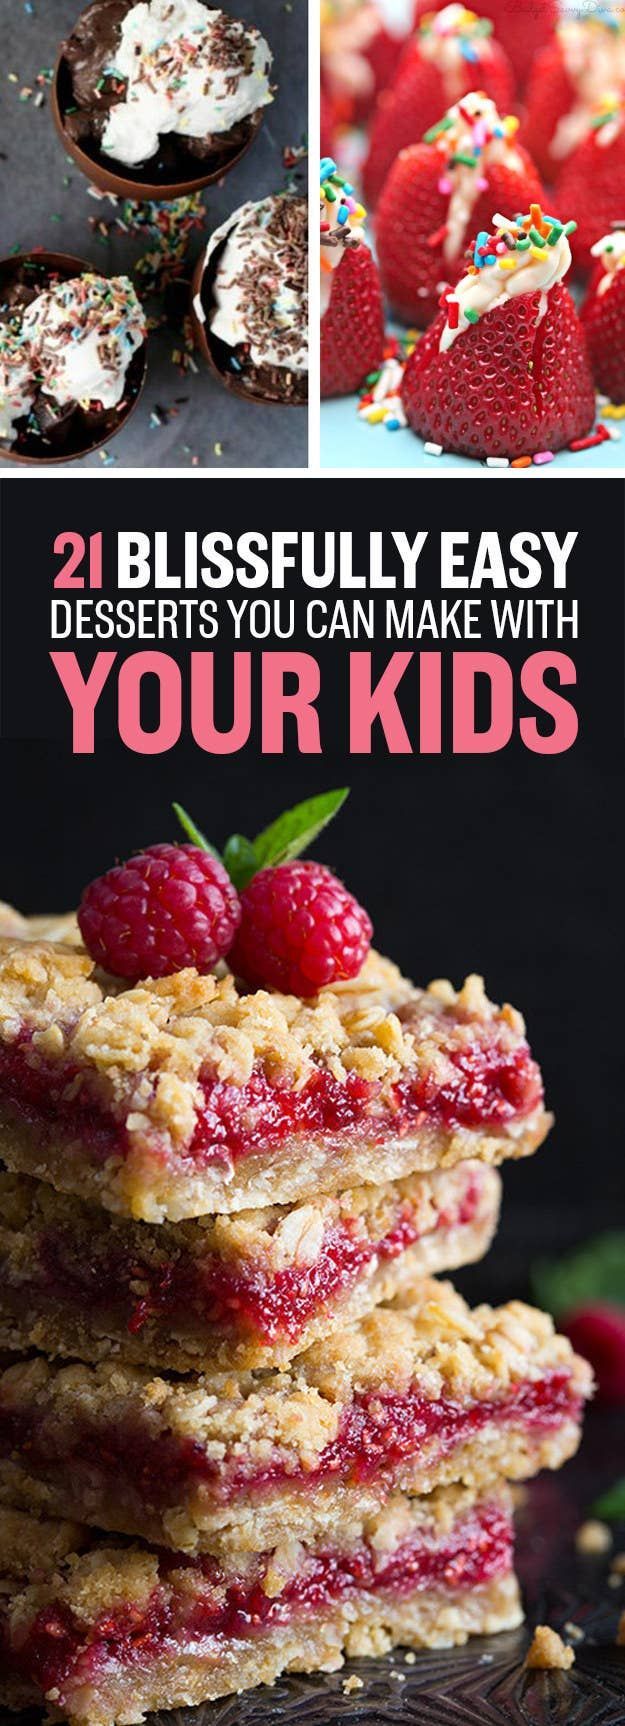 21 Blissfully Easy Desserts You Can Make With Your Kids -   19 thanksgiving desserts kids can make ideas